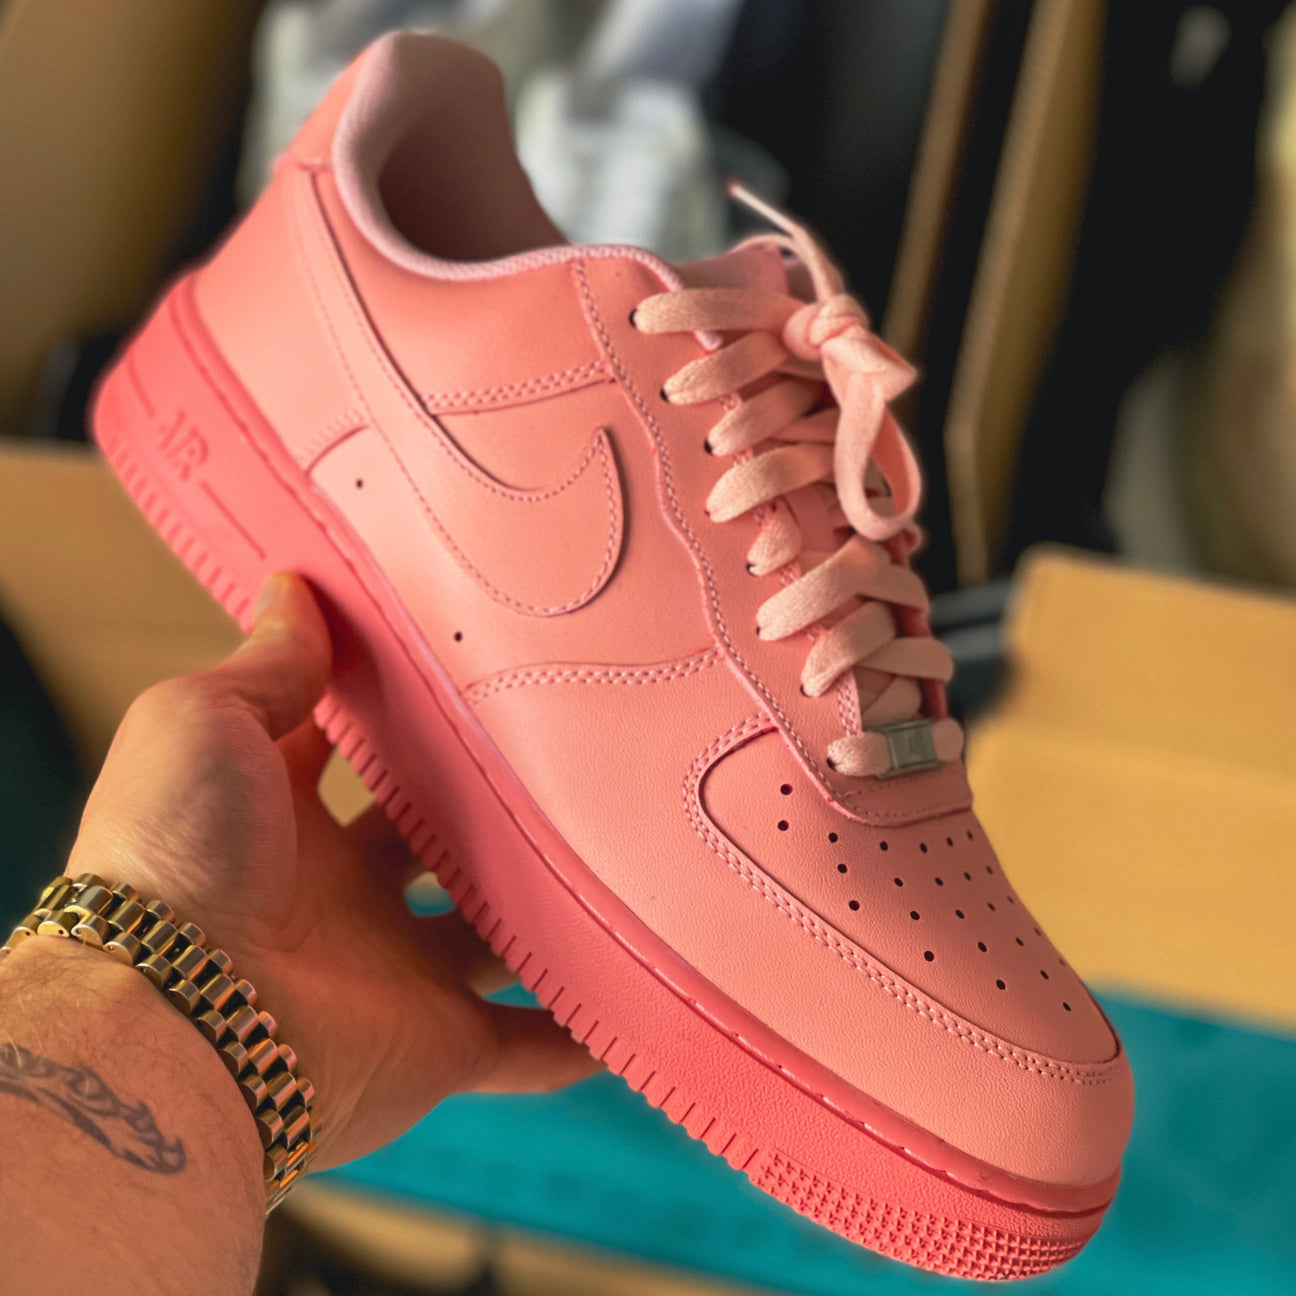 Nike Air Force 1 x Color Dip Dyed